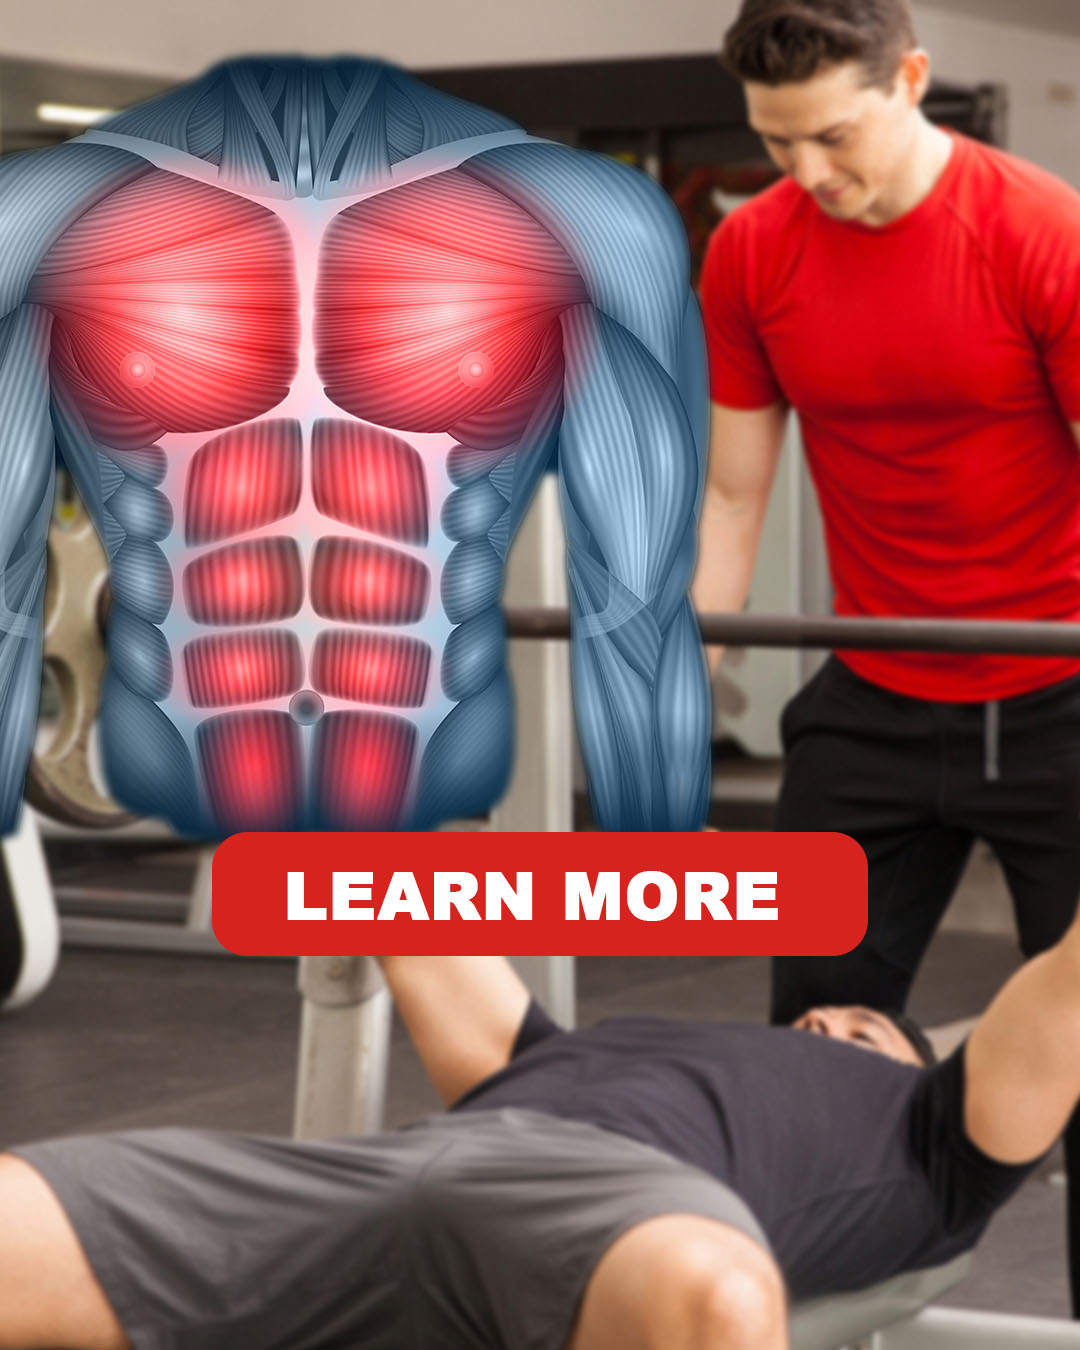 The exercises for rounded shoulders that trainers recommend